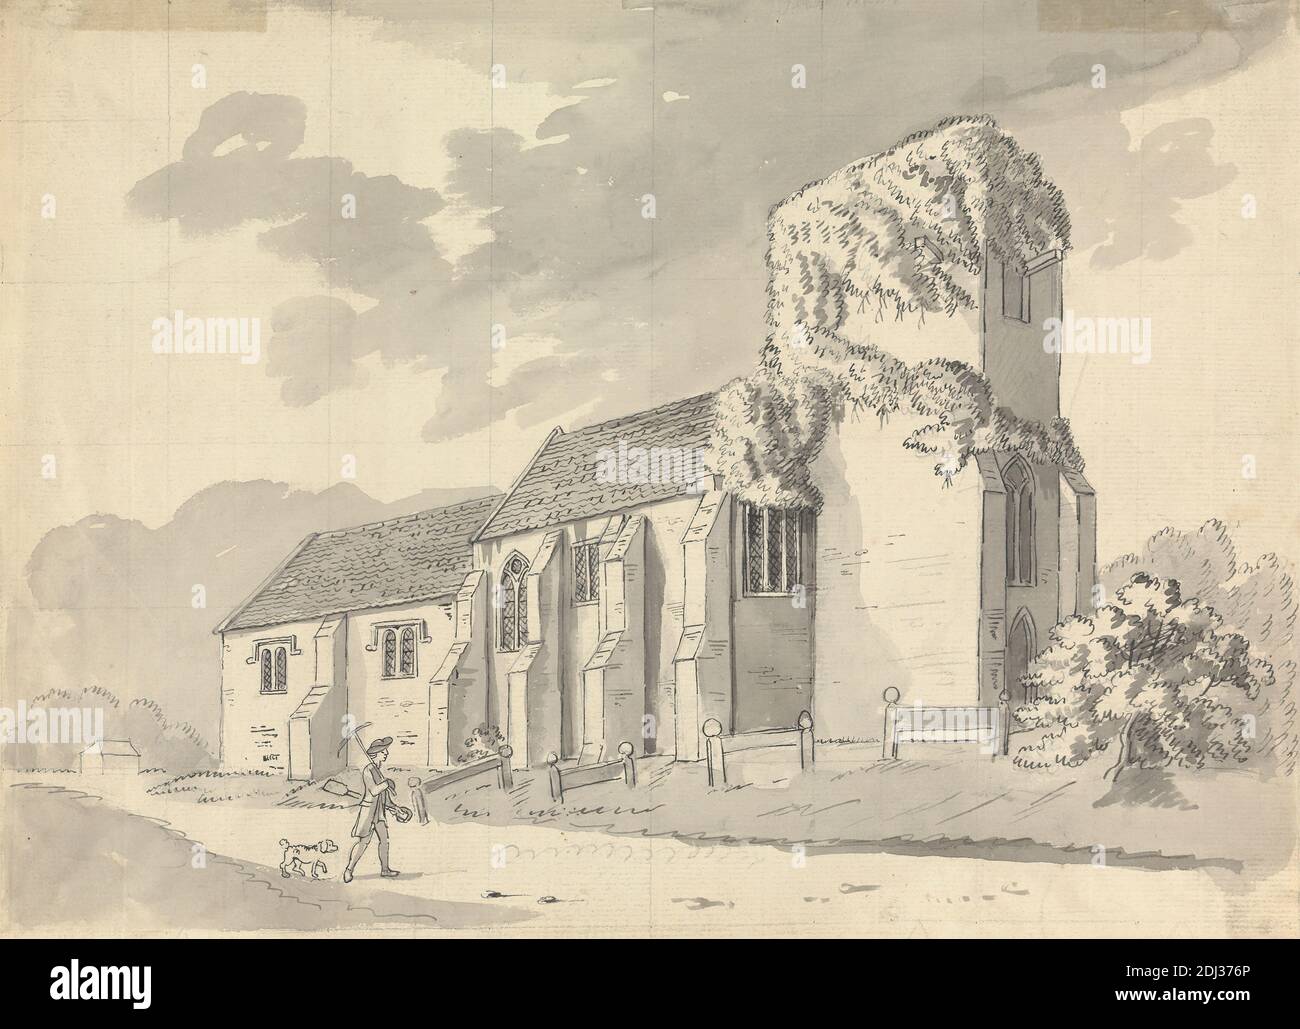 South Mimms Church, Hertfordshire, Capt. Francis Grose, 1731–1791, British, 1787, Pen and black ink, black wash, and graphite, squared for transfer on medium, slightly textured, cream laid paper, Sheet: 9 1/2 x 12 1/2in. (24.1 x 31.8cm) and Sheet: 9 1/2 × 12 3/4 inches (24.1 × 32.4 cm), architectural subject, church, dog (animal), ivy, man, road, England, Hertfordshire, South Mimms, United Kingdom Stock Photo